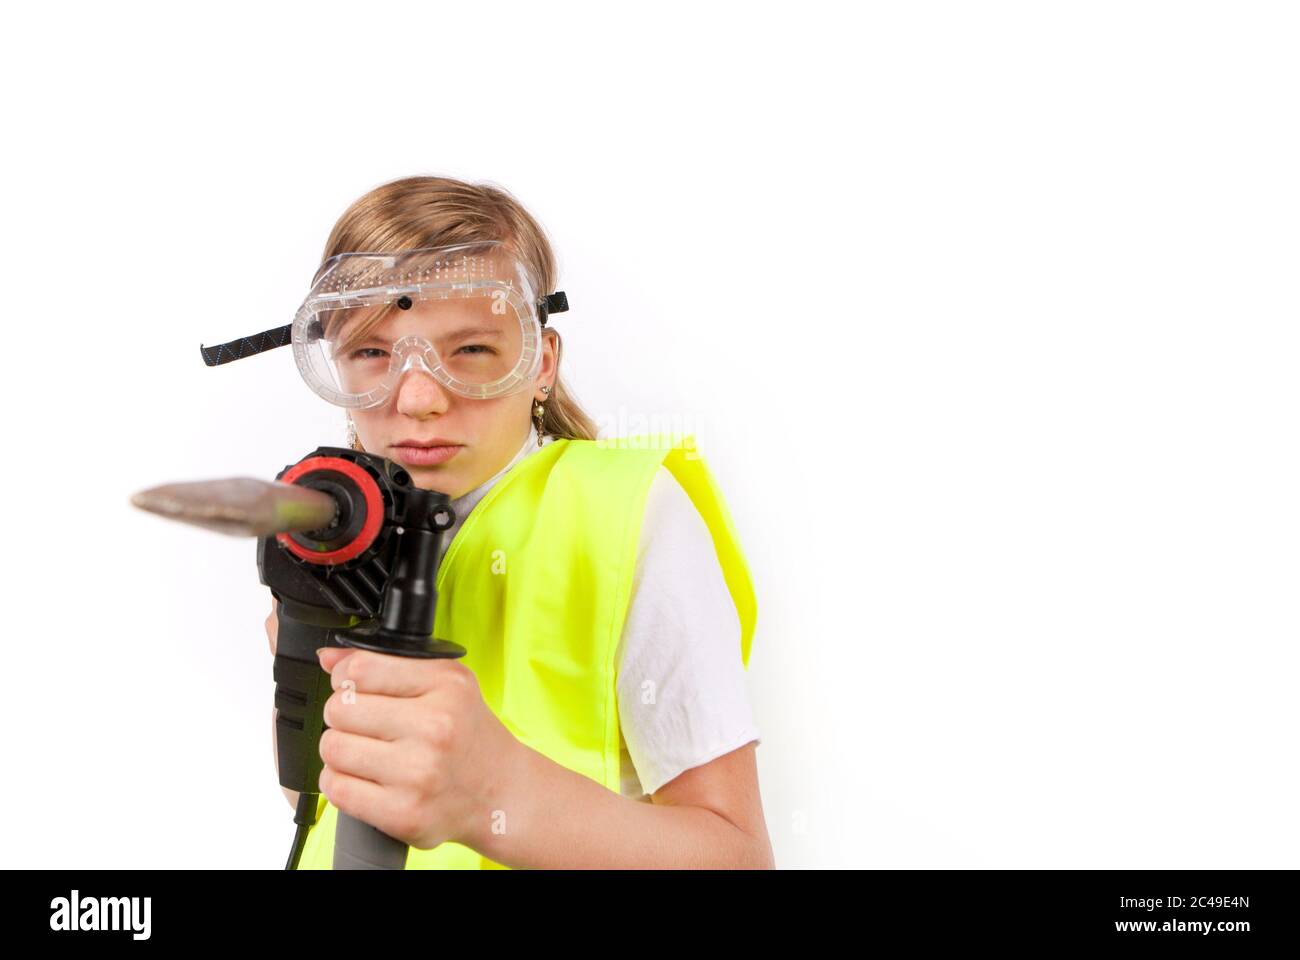 Cute young girl wearing safety vest and safety goggles posing with a rotary hammer Stock Photo